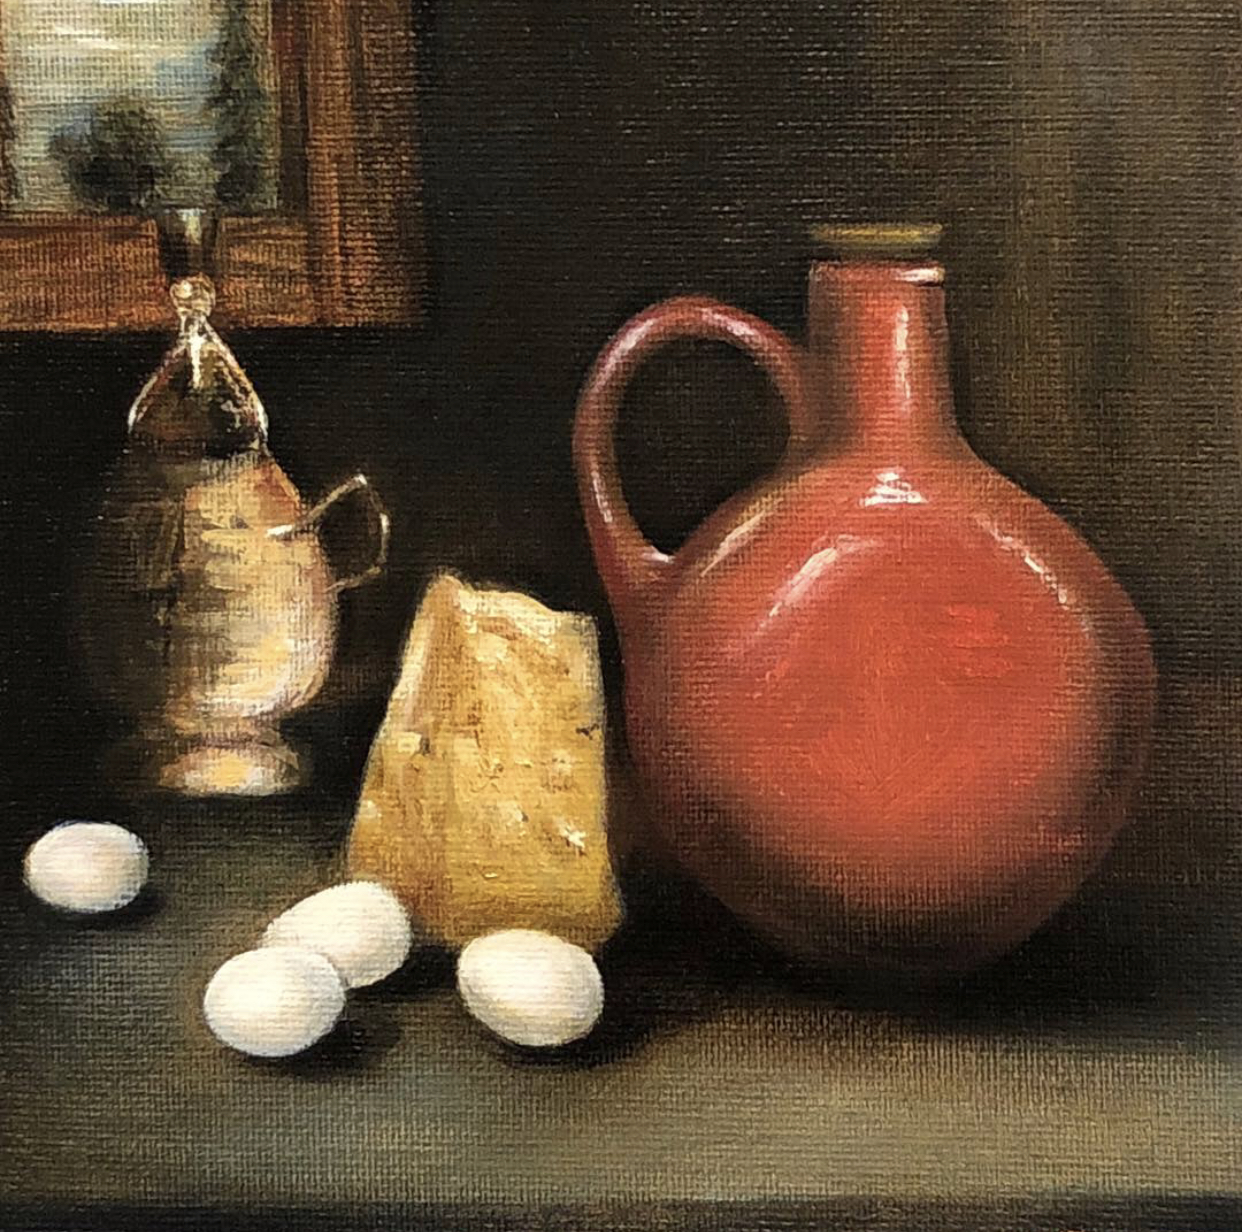   “Eggs &amp; Cheese”   $80  Oil on Canvas Board  6” X 6” 